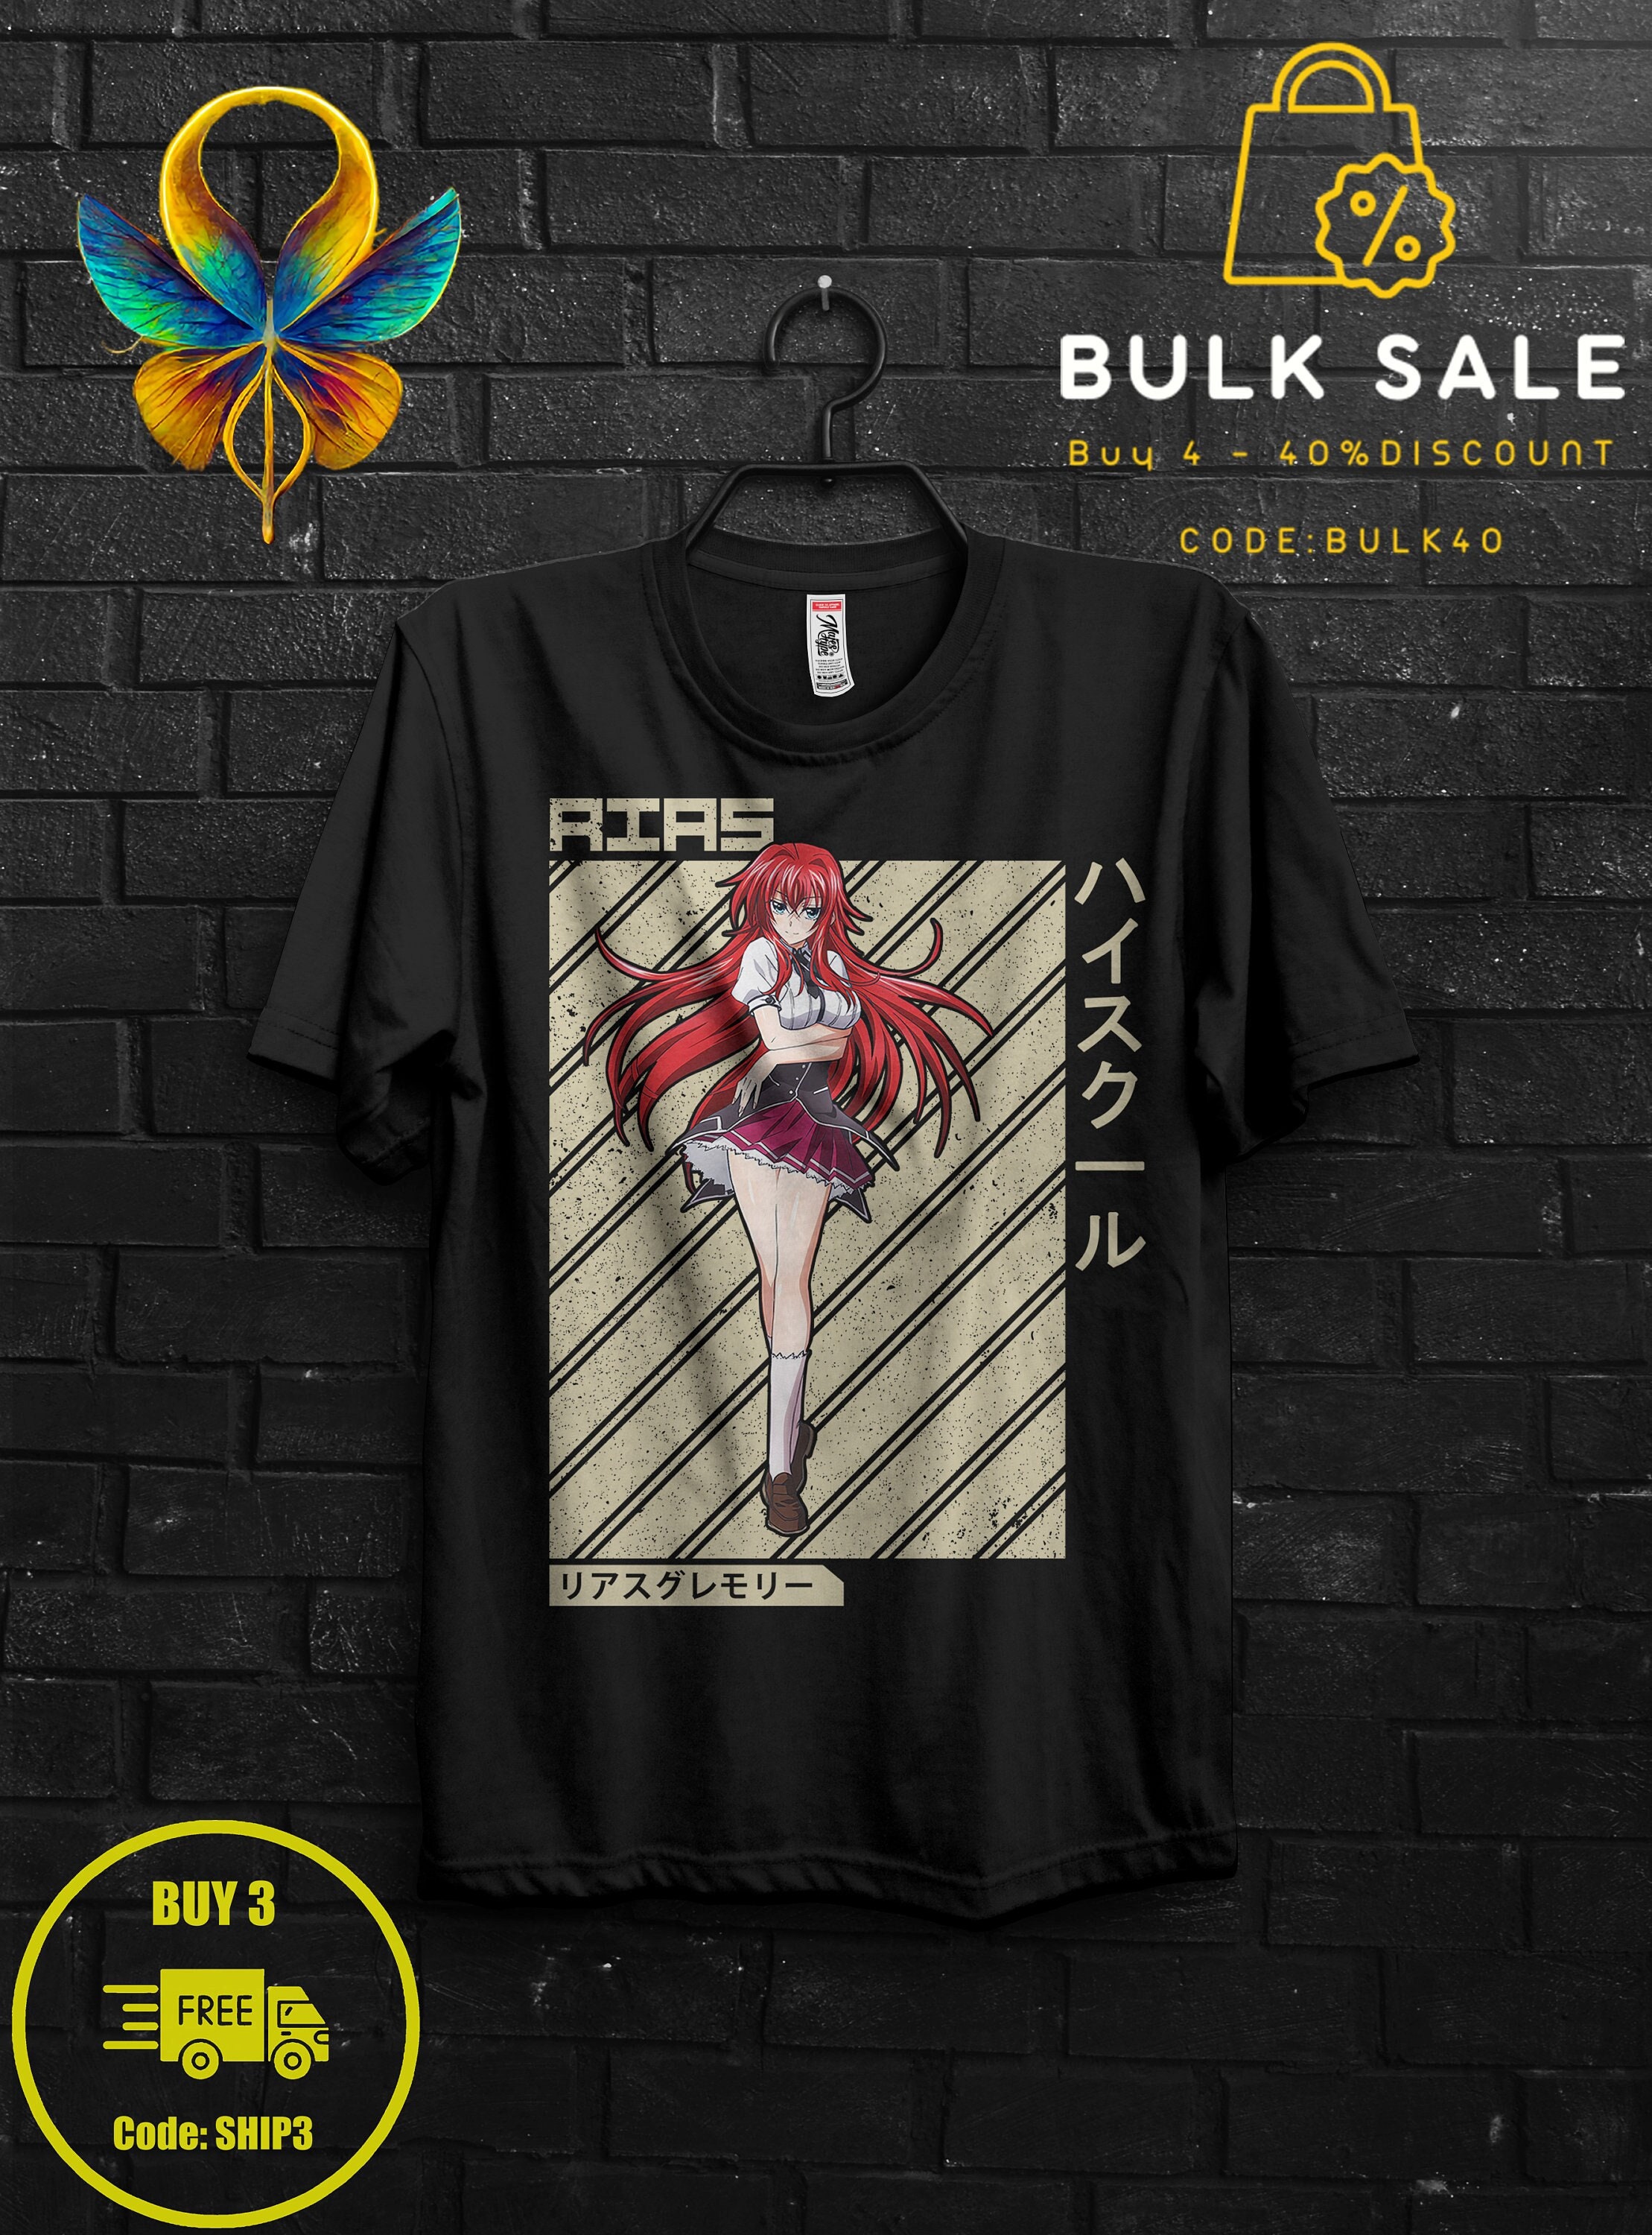 Rias Gremory Shirt Anime Gift Cosplay For Girl,Issei Hyoudou Sweat,Xenovia Appareal For Her,High School DxD Tee,Rossweisse Tshirt For Sitri 1586062416